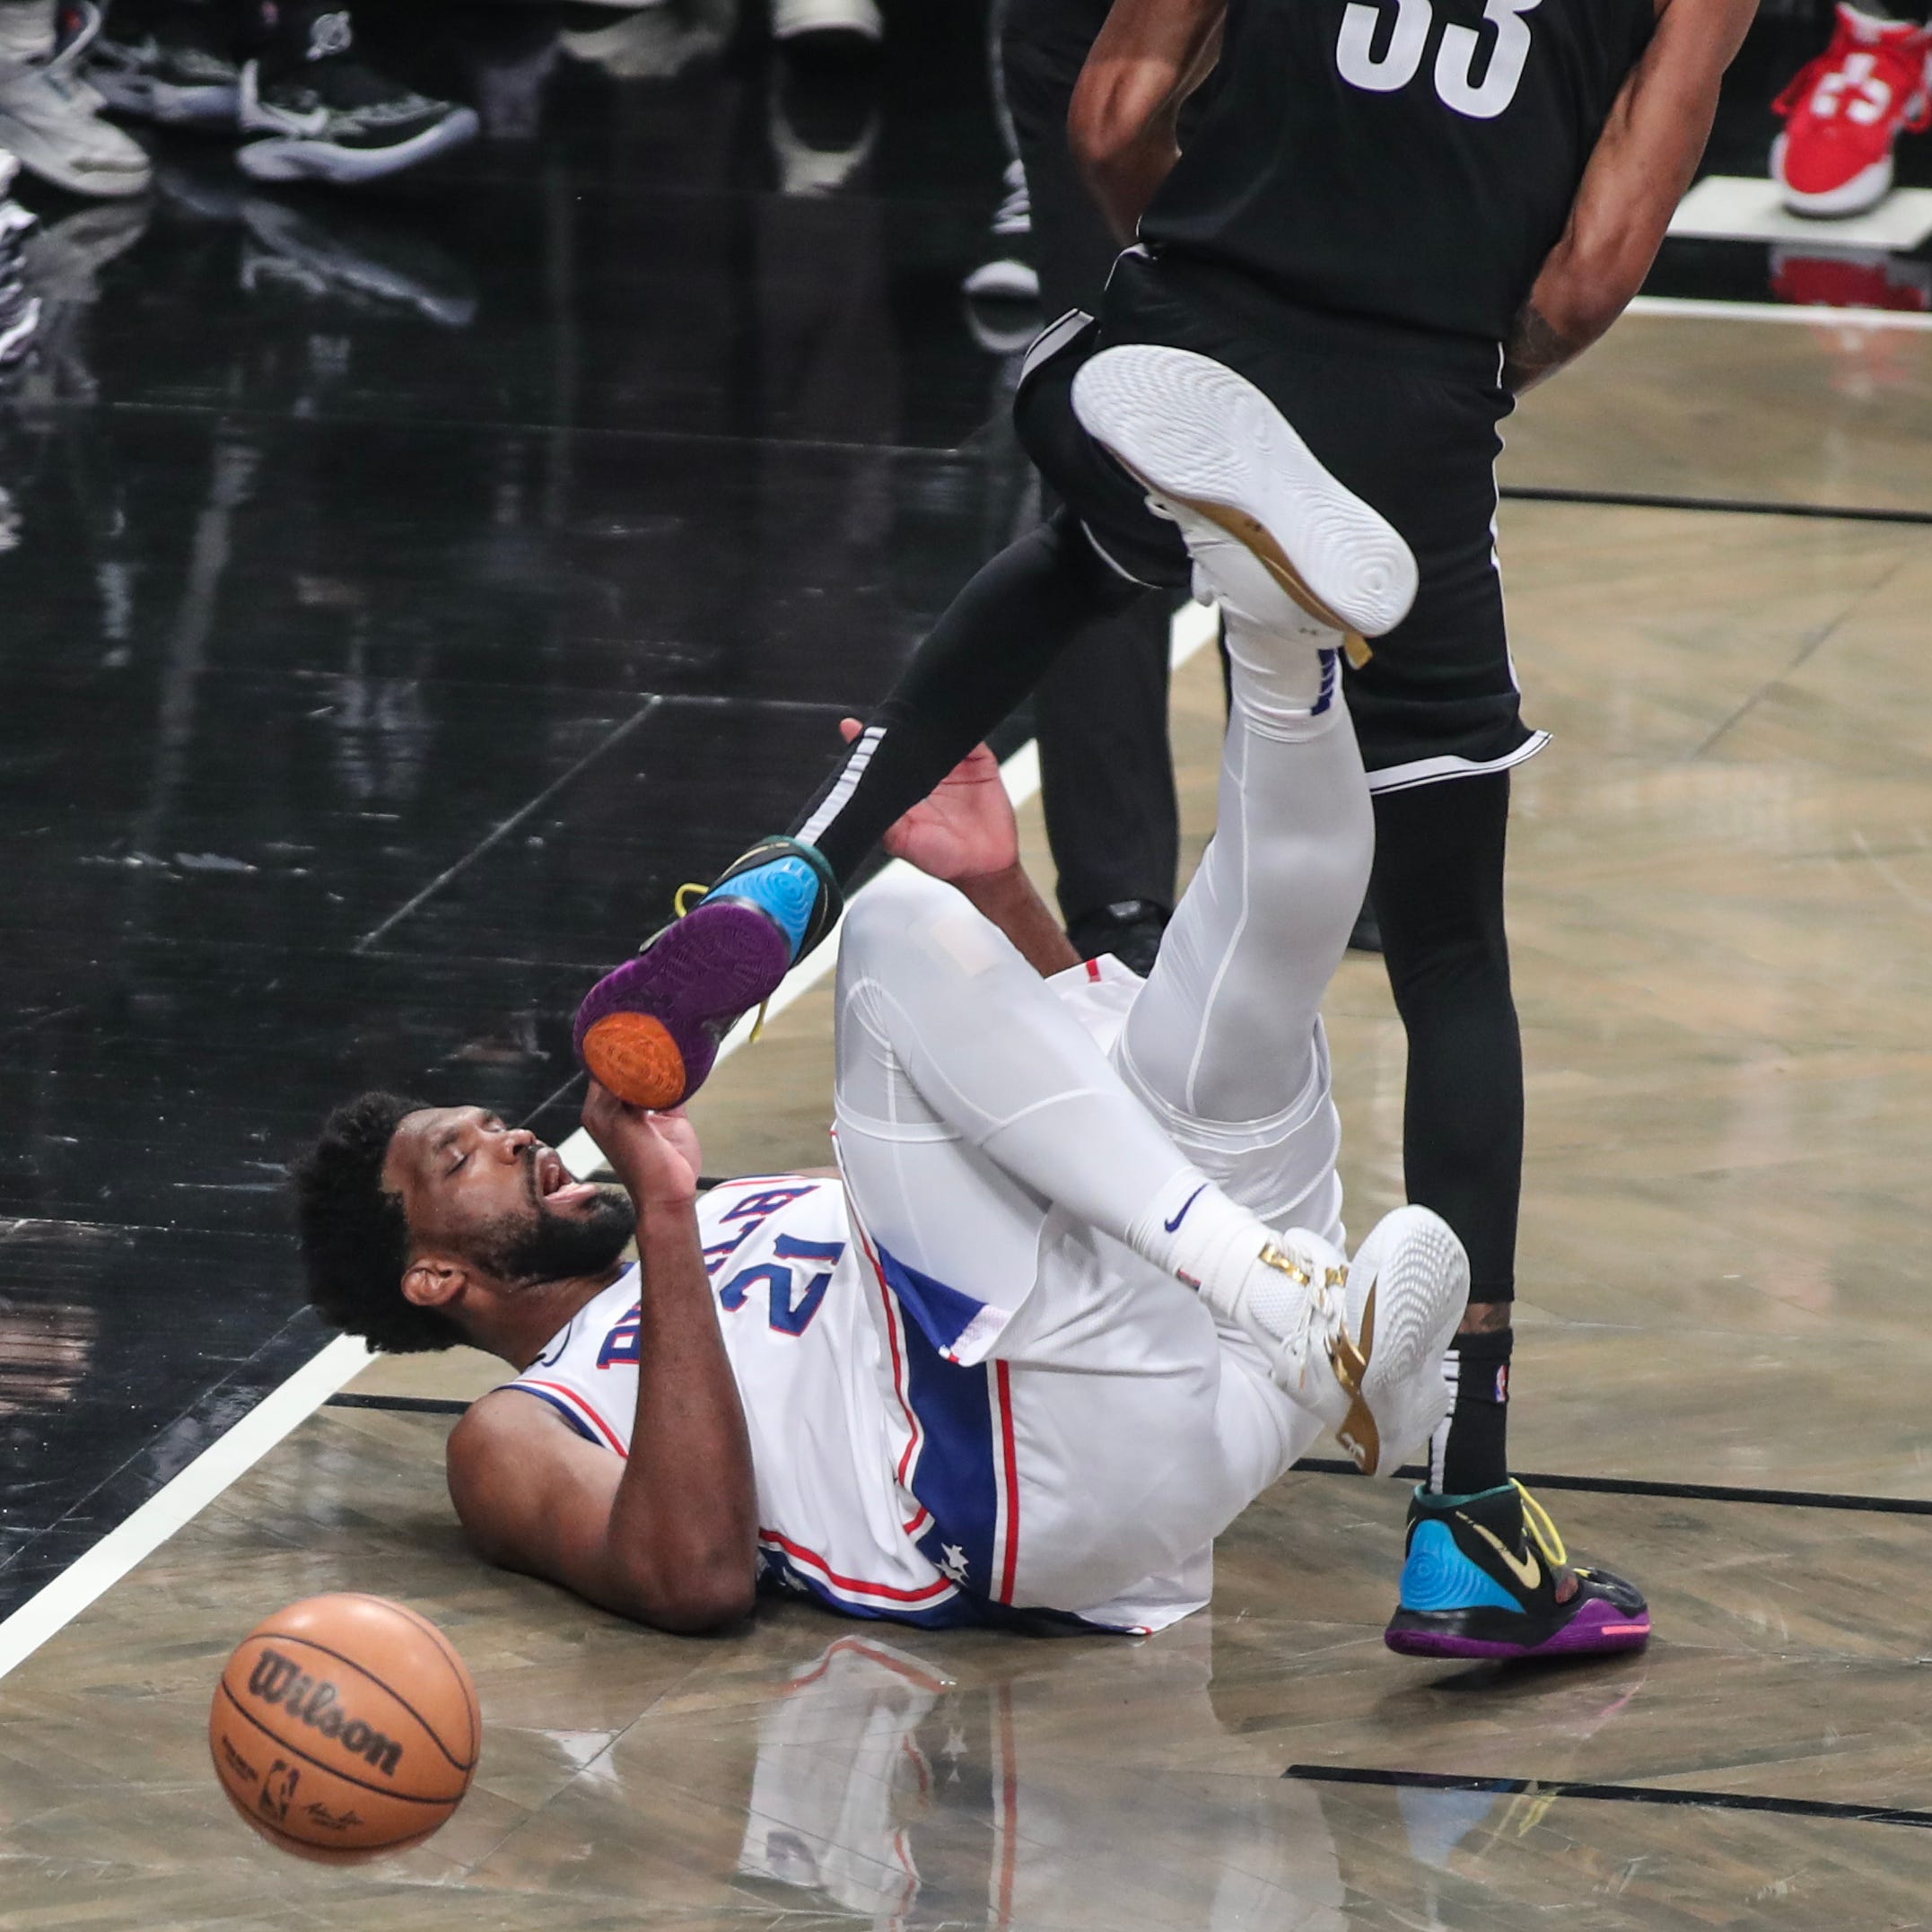 Game 3: The Philadelphia 76ers' Joel Embiid (21) falls to the floor after colliding with the Brooklyn Nets' Nic Claxton during the first quarter at Barclays Center on April 20.